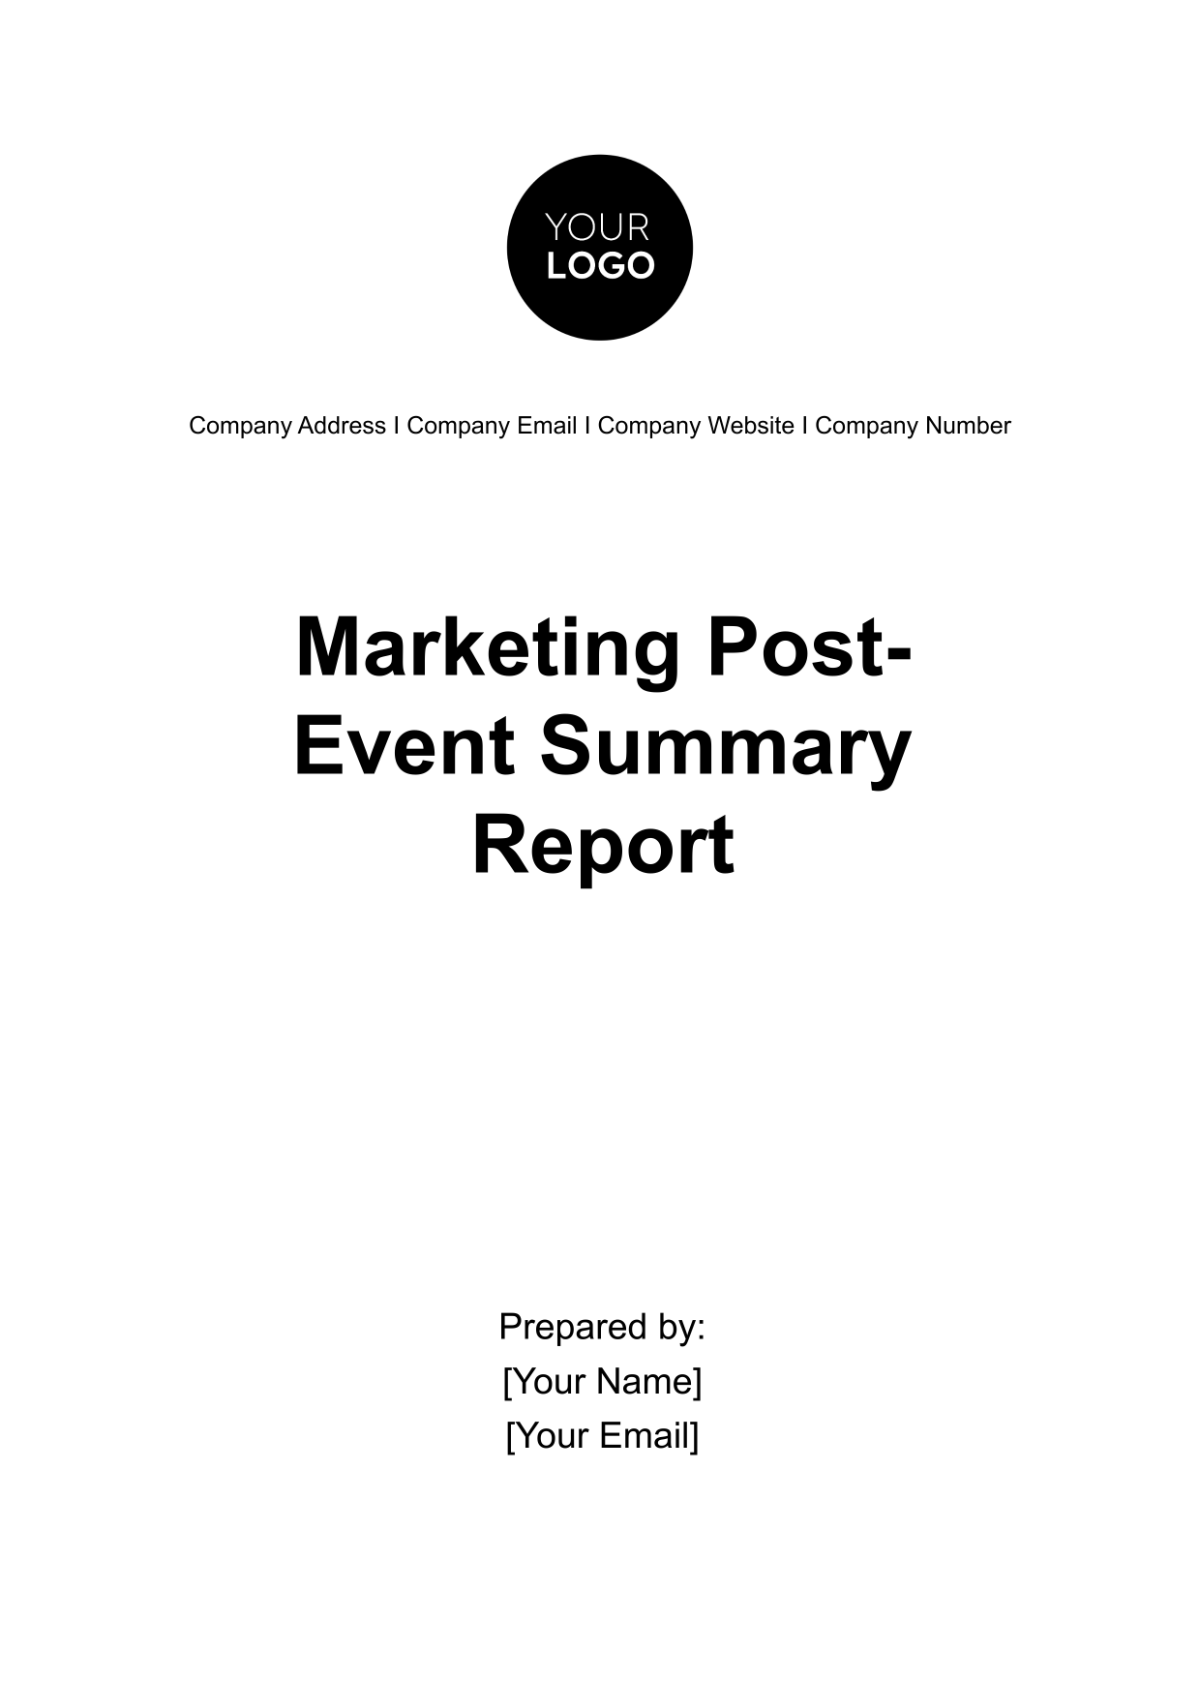 Free Marketing Post-Event Summary Report Template